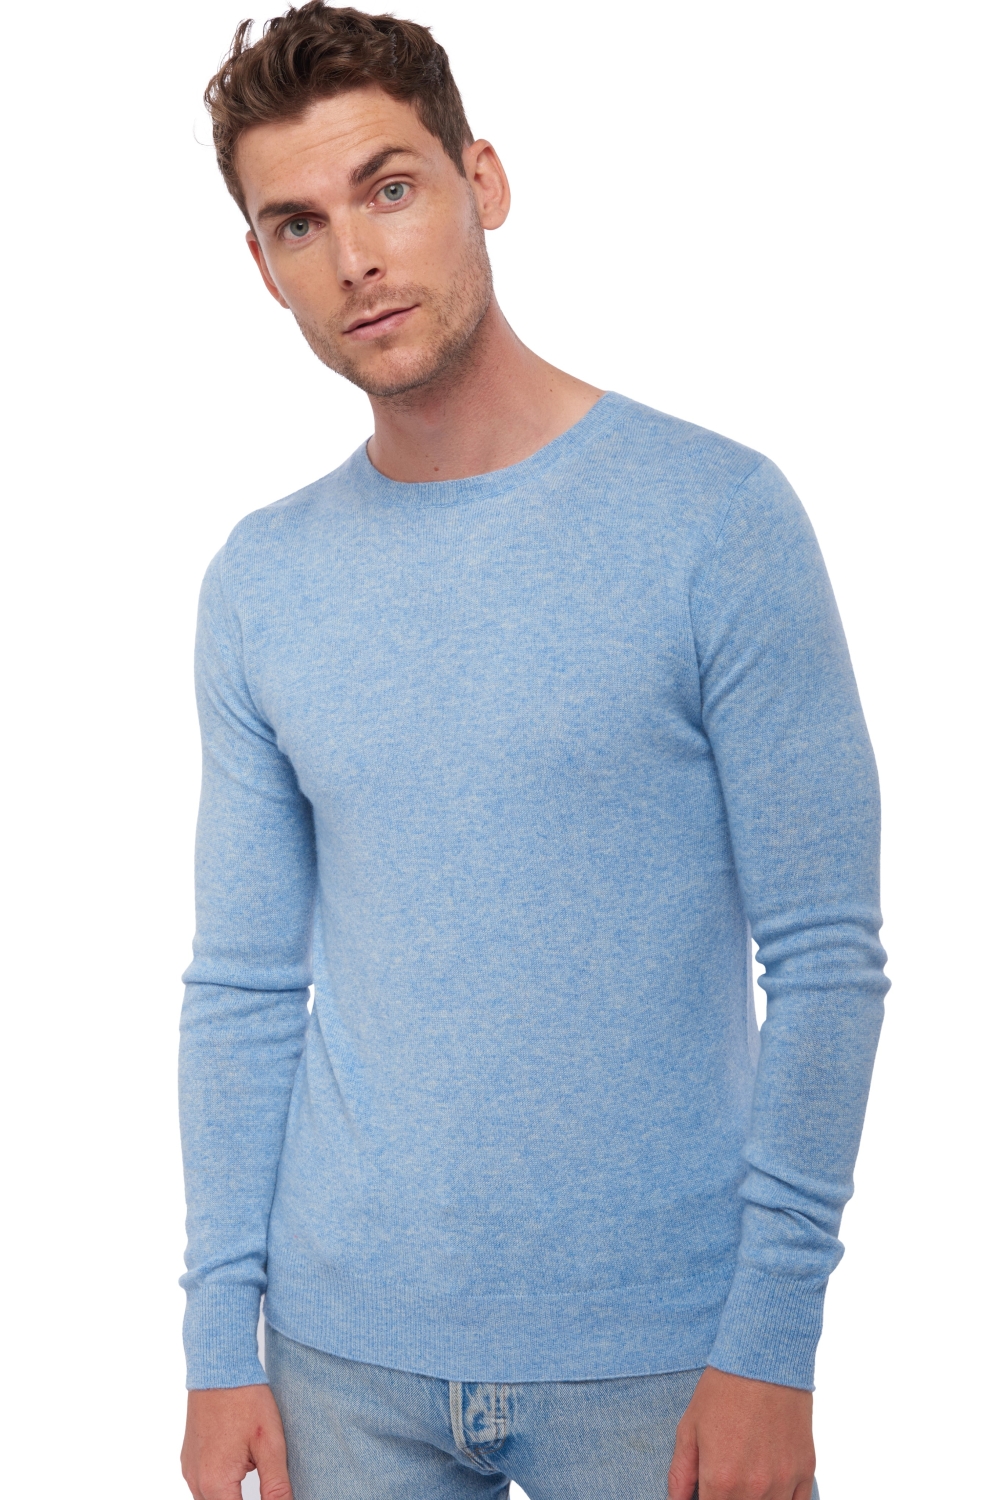 Cashmere men basic sweaters at low prices tao first powder blue m